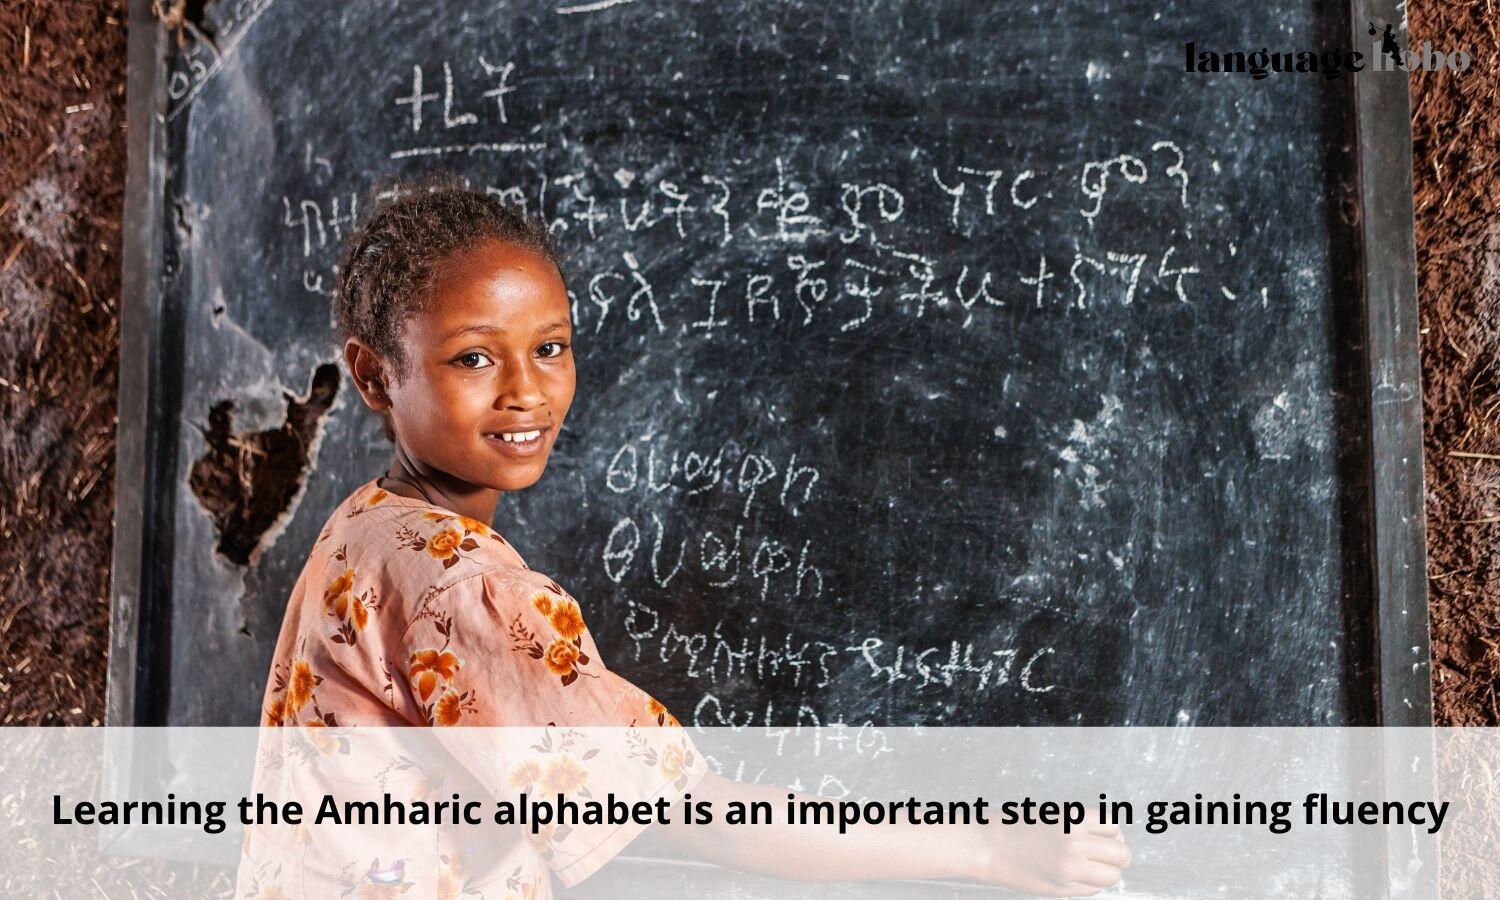 learning the amharic alphabet is important